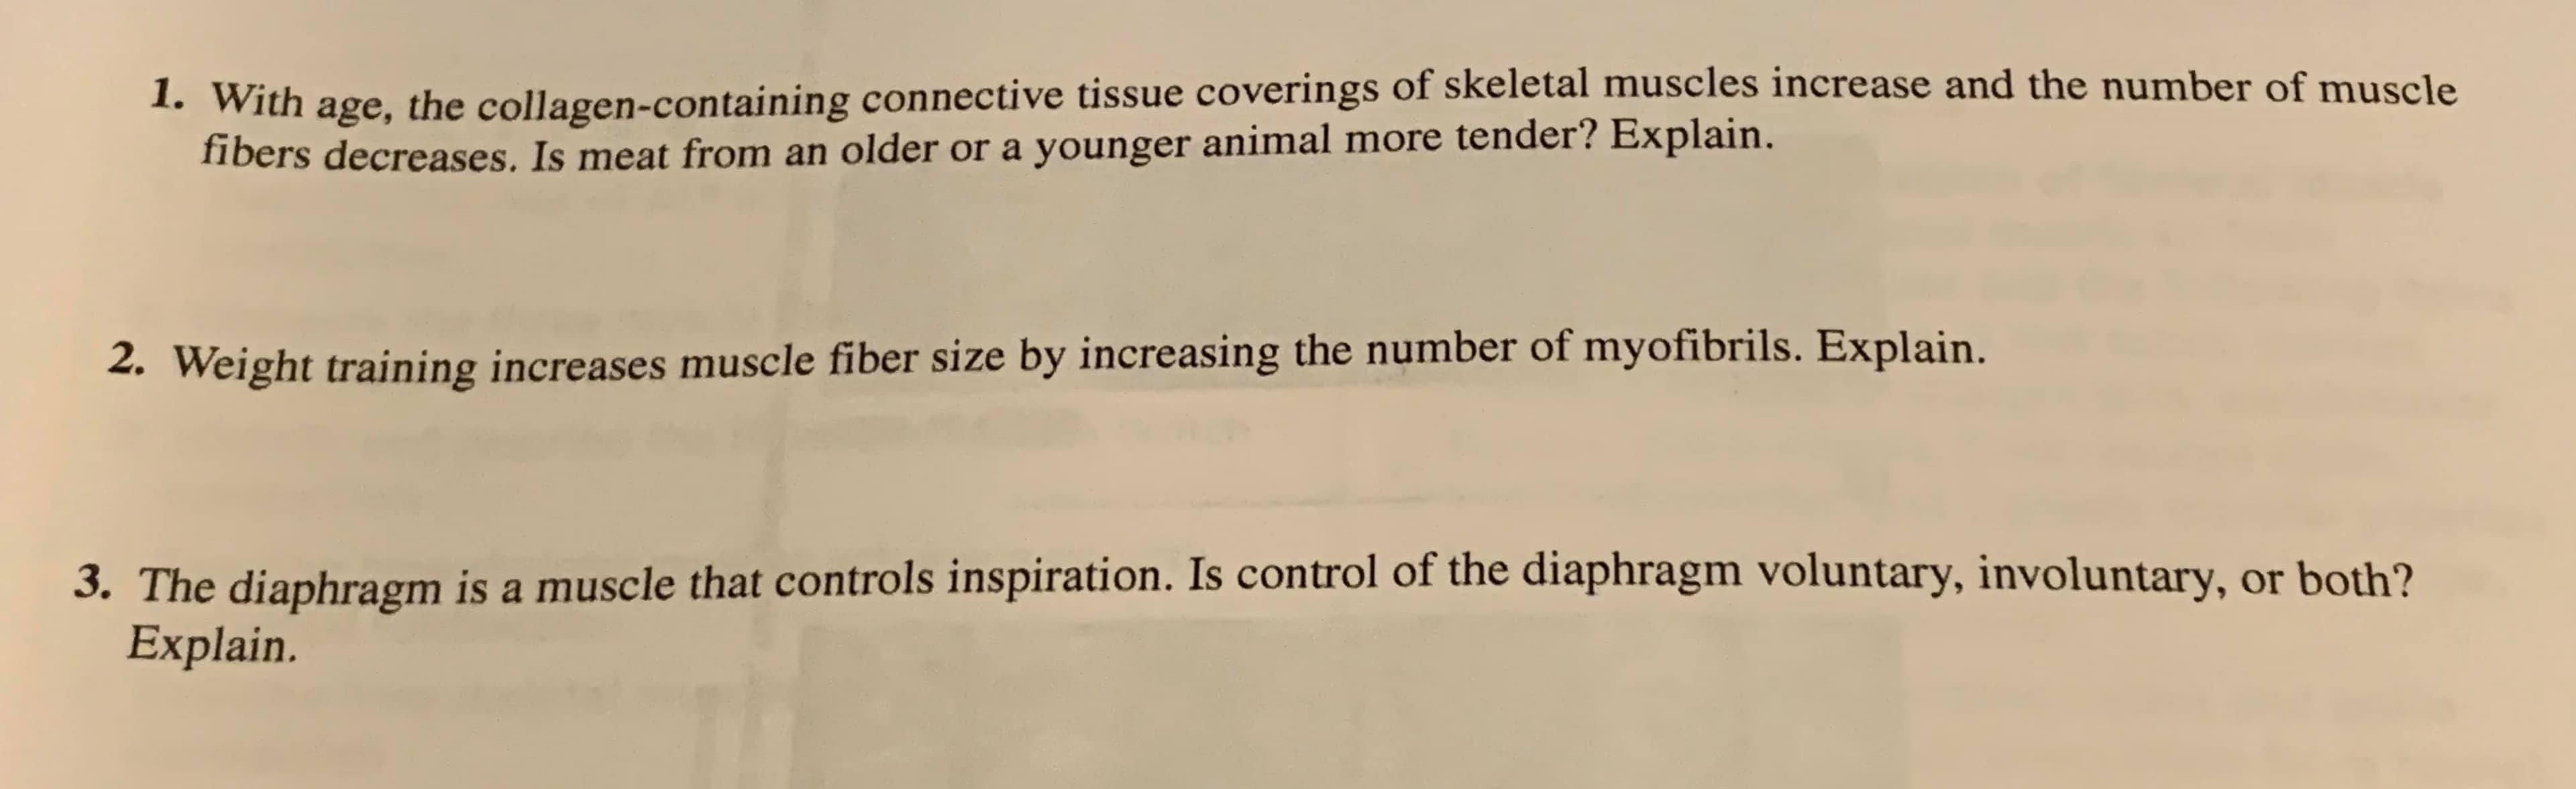 1. With age, the collagen-containing connective tissue coverings of skeletal muscles increase and the number of muscle
fibers decreases. Is meat from an older or a younger animal more tender? Explain.
2. Weight training increases muscle fiber size by increasing the number of myofibrils. Explain.
3. The diaphragm is a muscle that controls inspiration. Is control of the diaphragm voluntary, involuntary, or both?
Explain.
